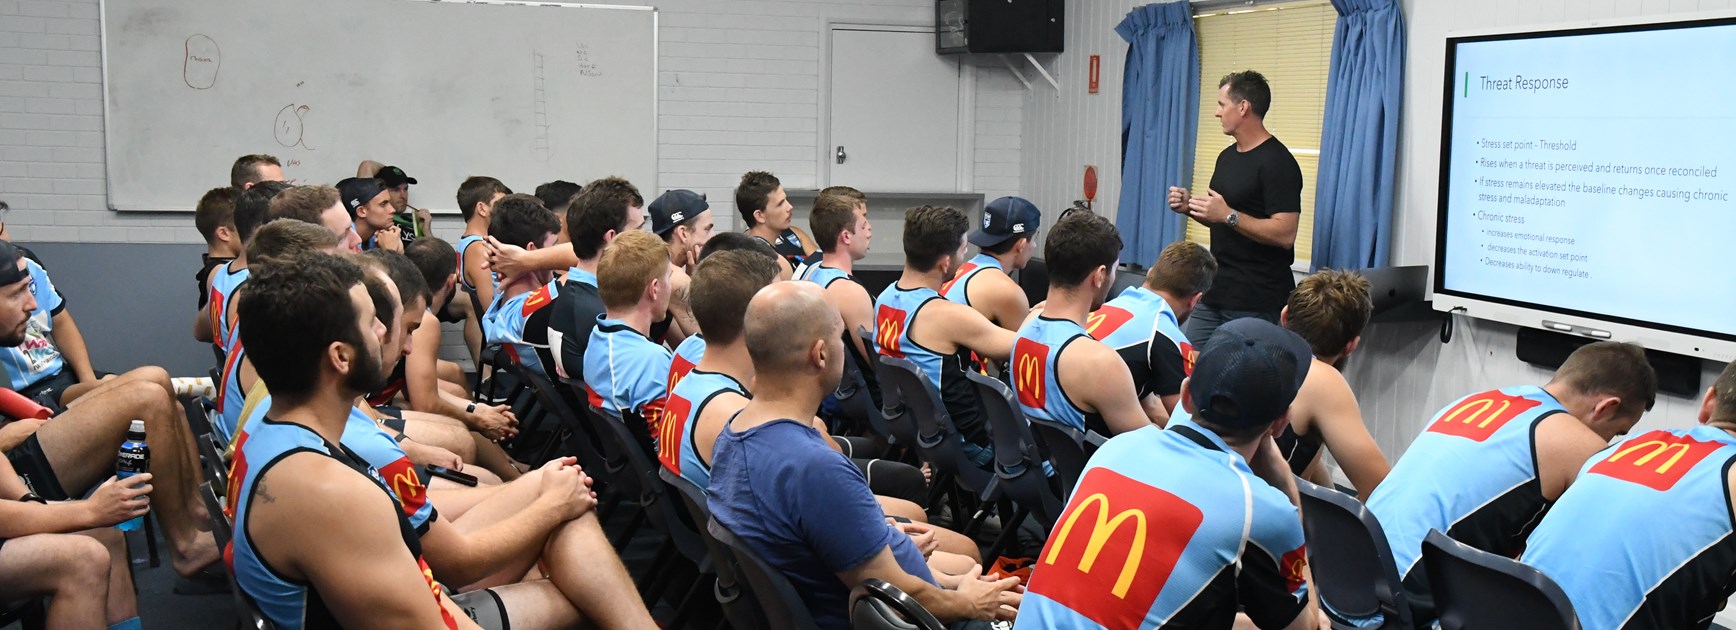 NSWRL Referees benefit from communication in camp